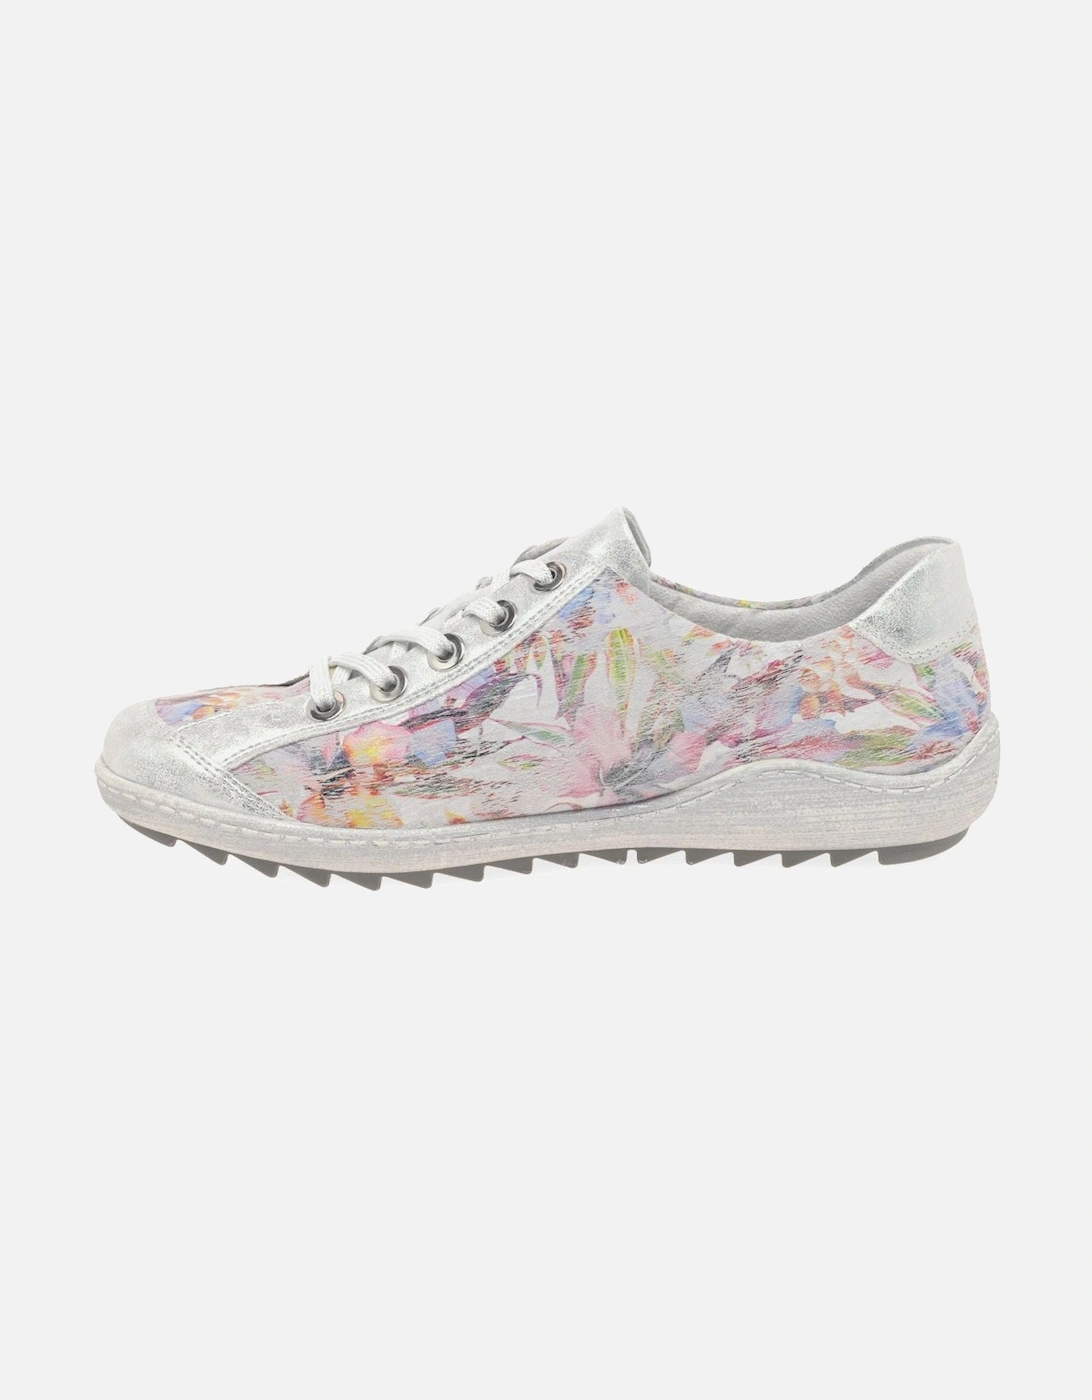 Bronte Womens Trainers